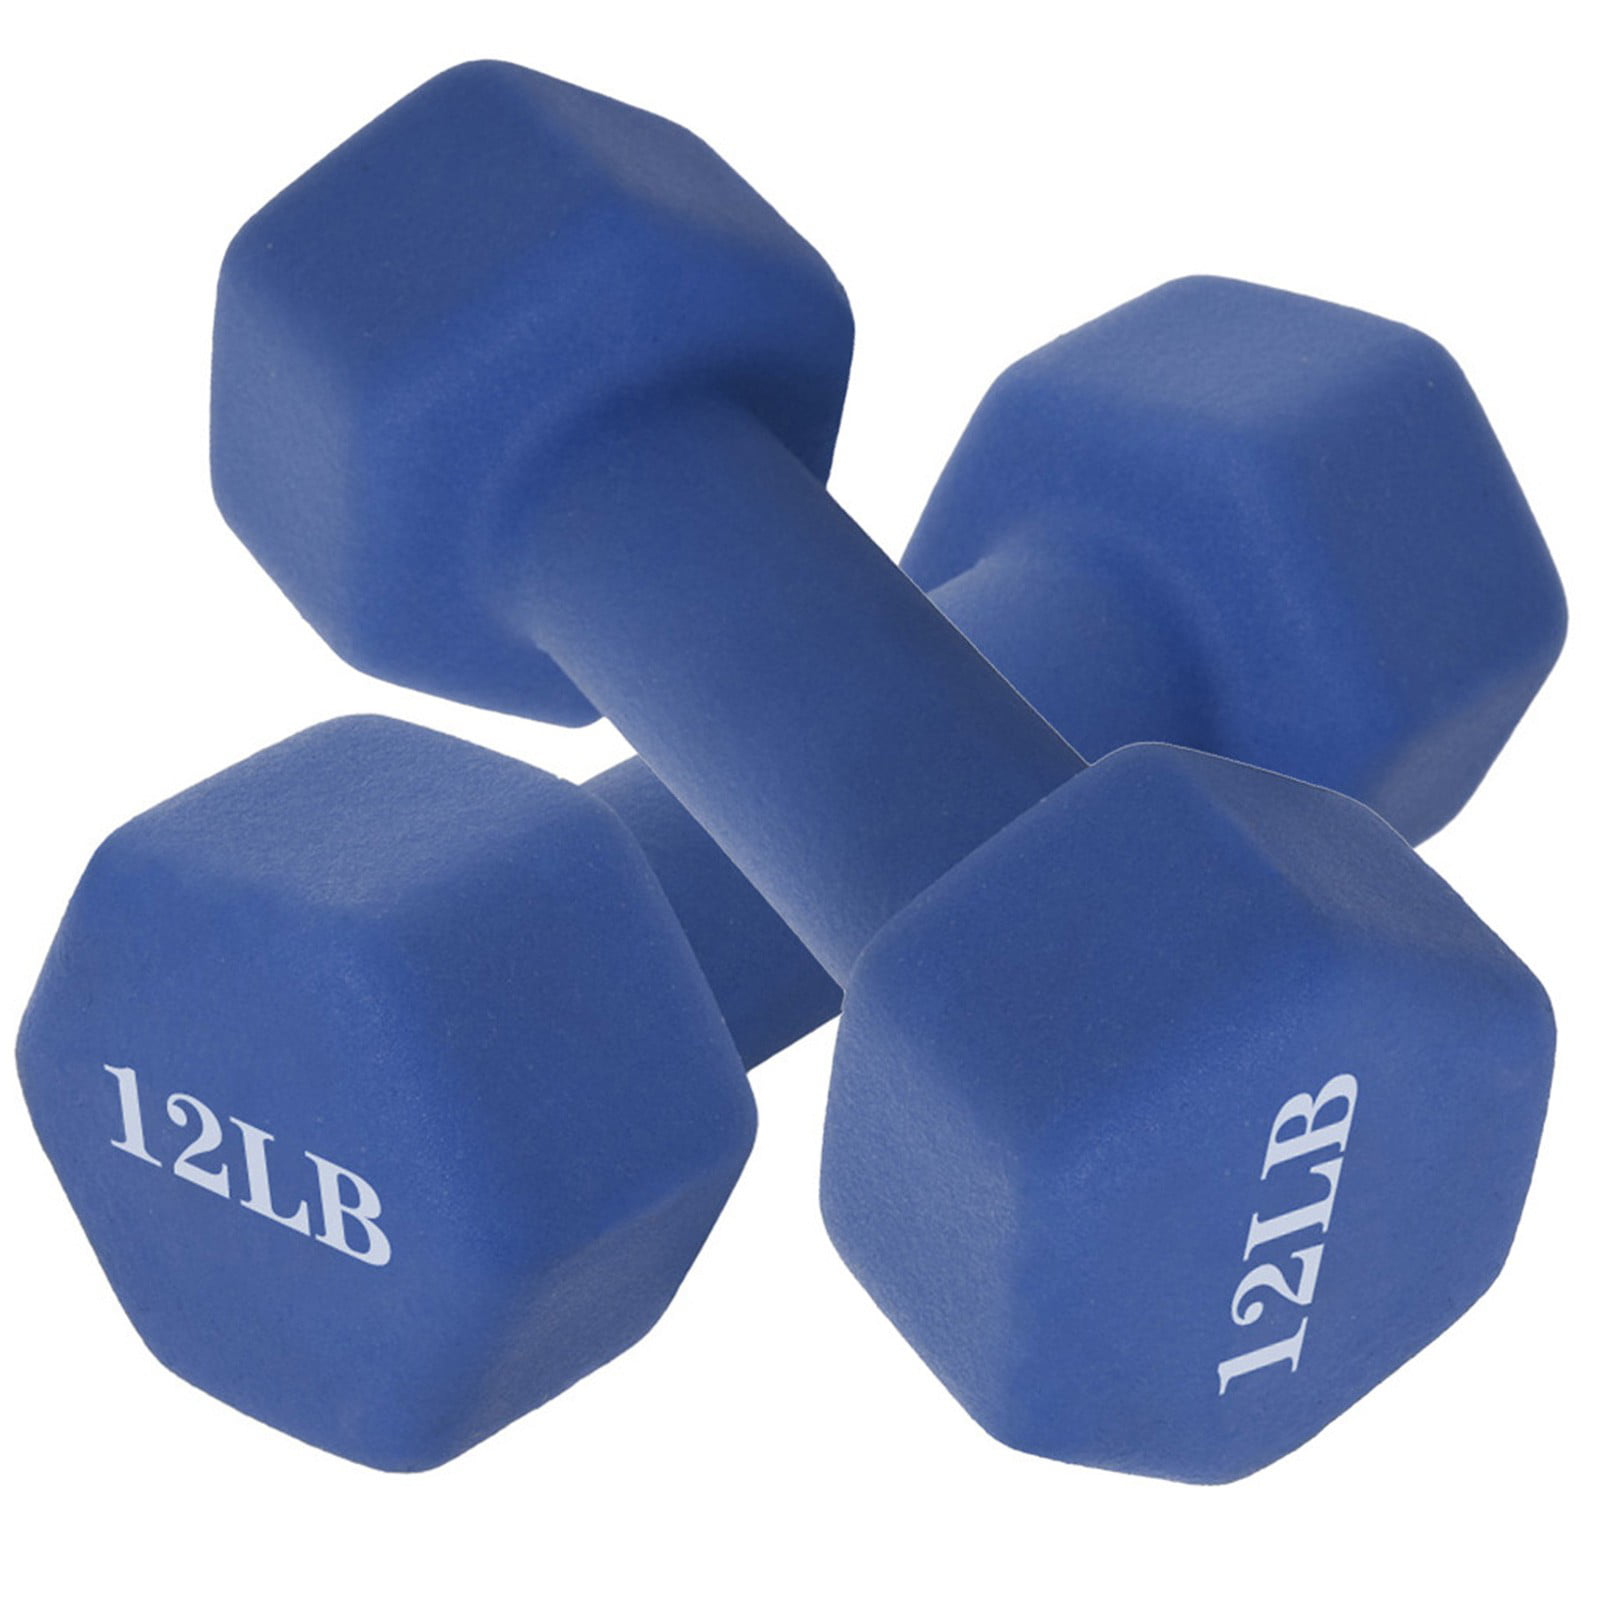 Details about   Lot Of Two 2lb Coated Dumbells 